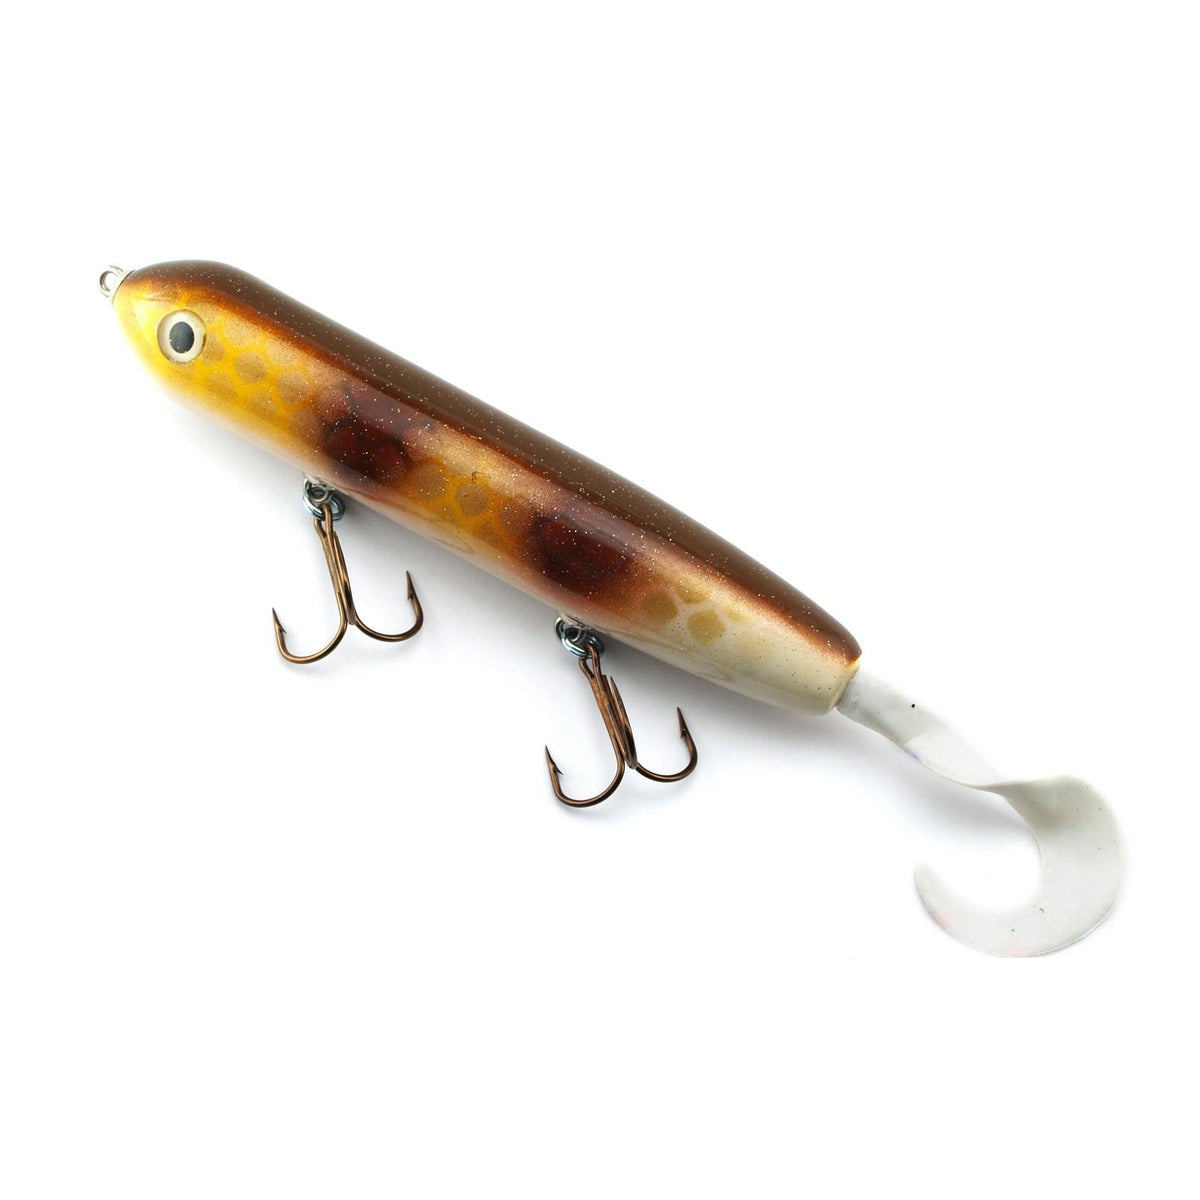 View of Jerk-Glide_Baits Suick Wabull Wild Action 8" Walleye available at EZOKO Pike and Musky Shop